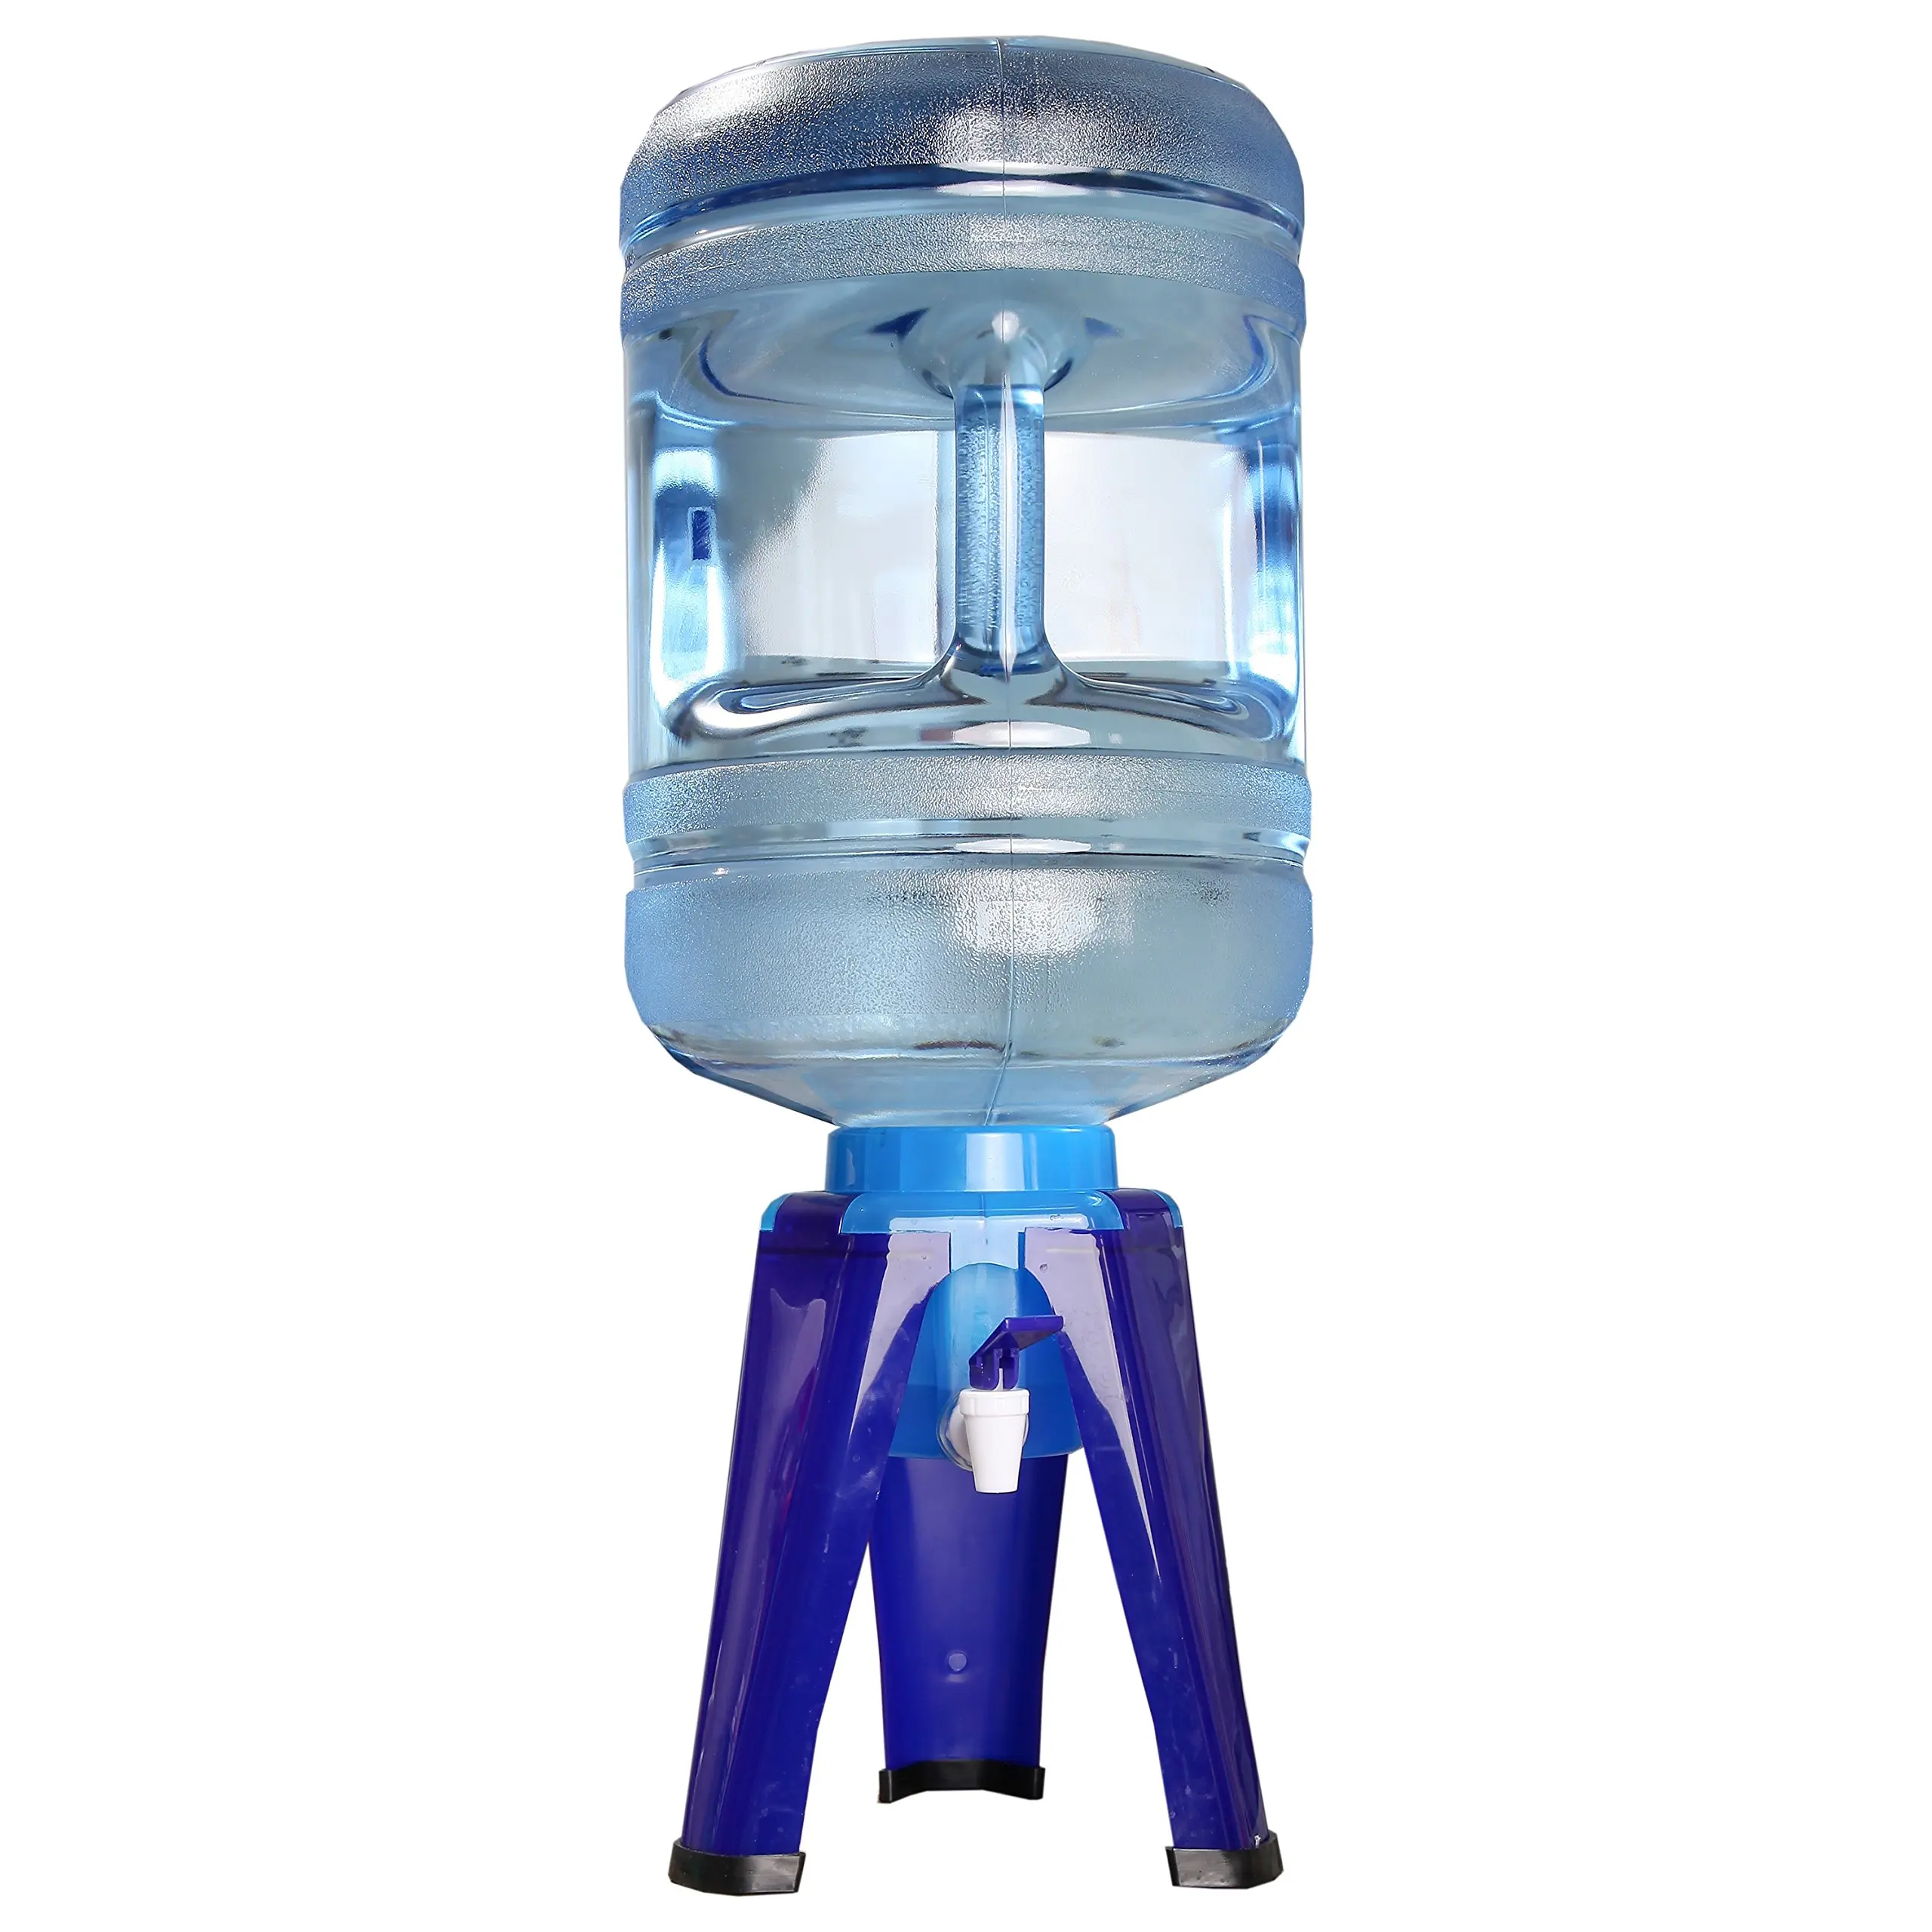 19.95. Home-x 5 Gallon Water Bottle Dispenser Stand, Water Cooler Stand. 